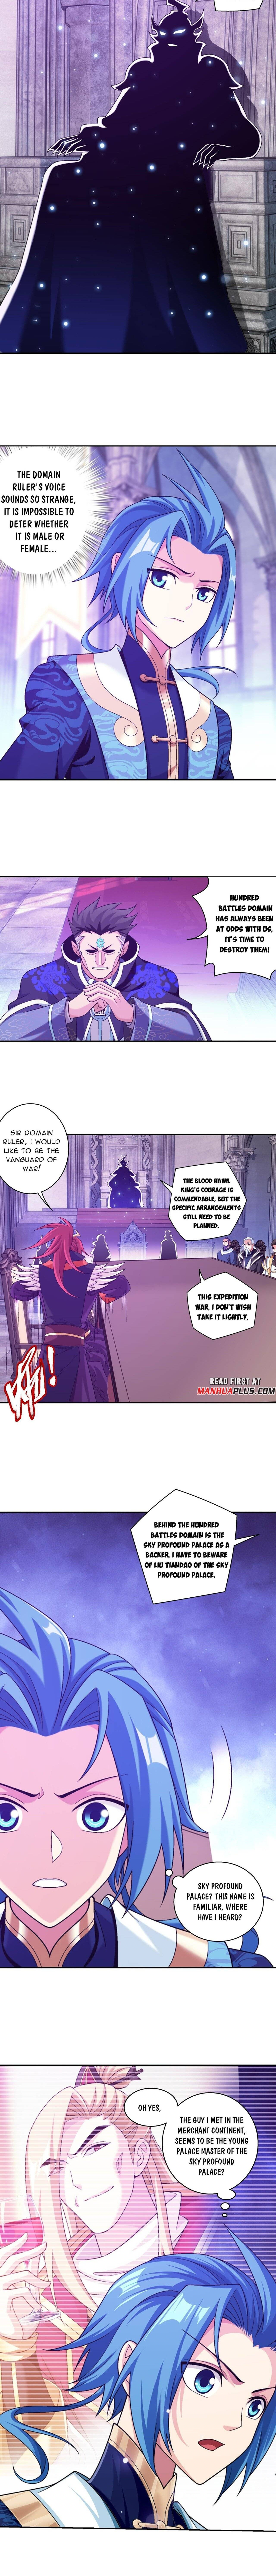 The Great Ruler Chapter 403